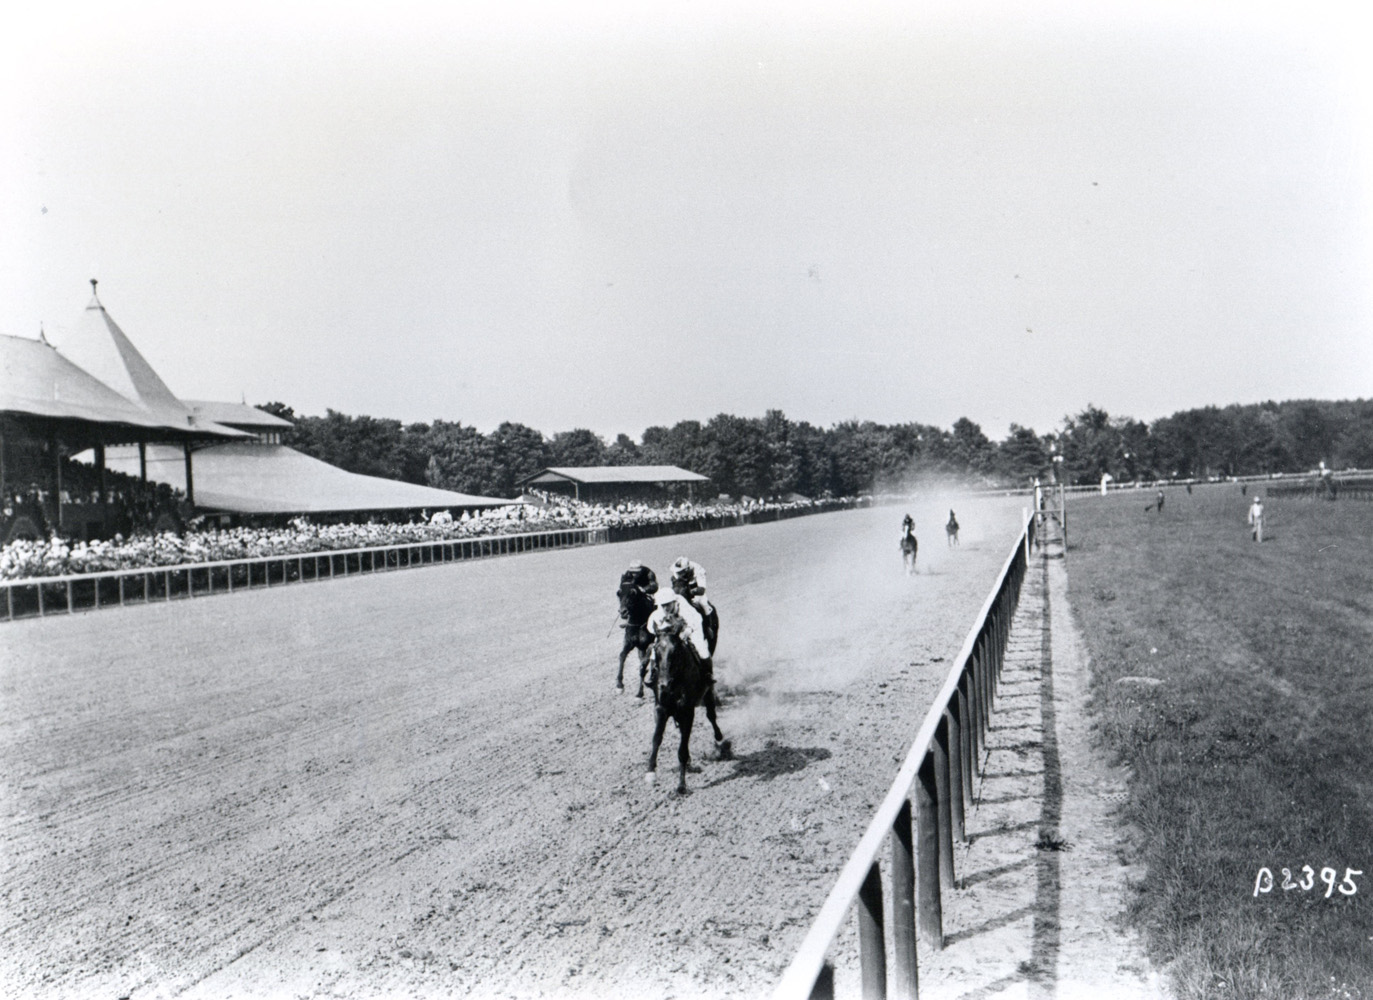 Sysonby (Nicol up) winning the 1905 Great Republic at Saratoga (Keeneland Library Cook Collection/Museum Collection)